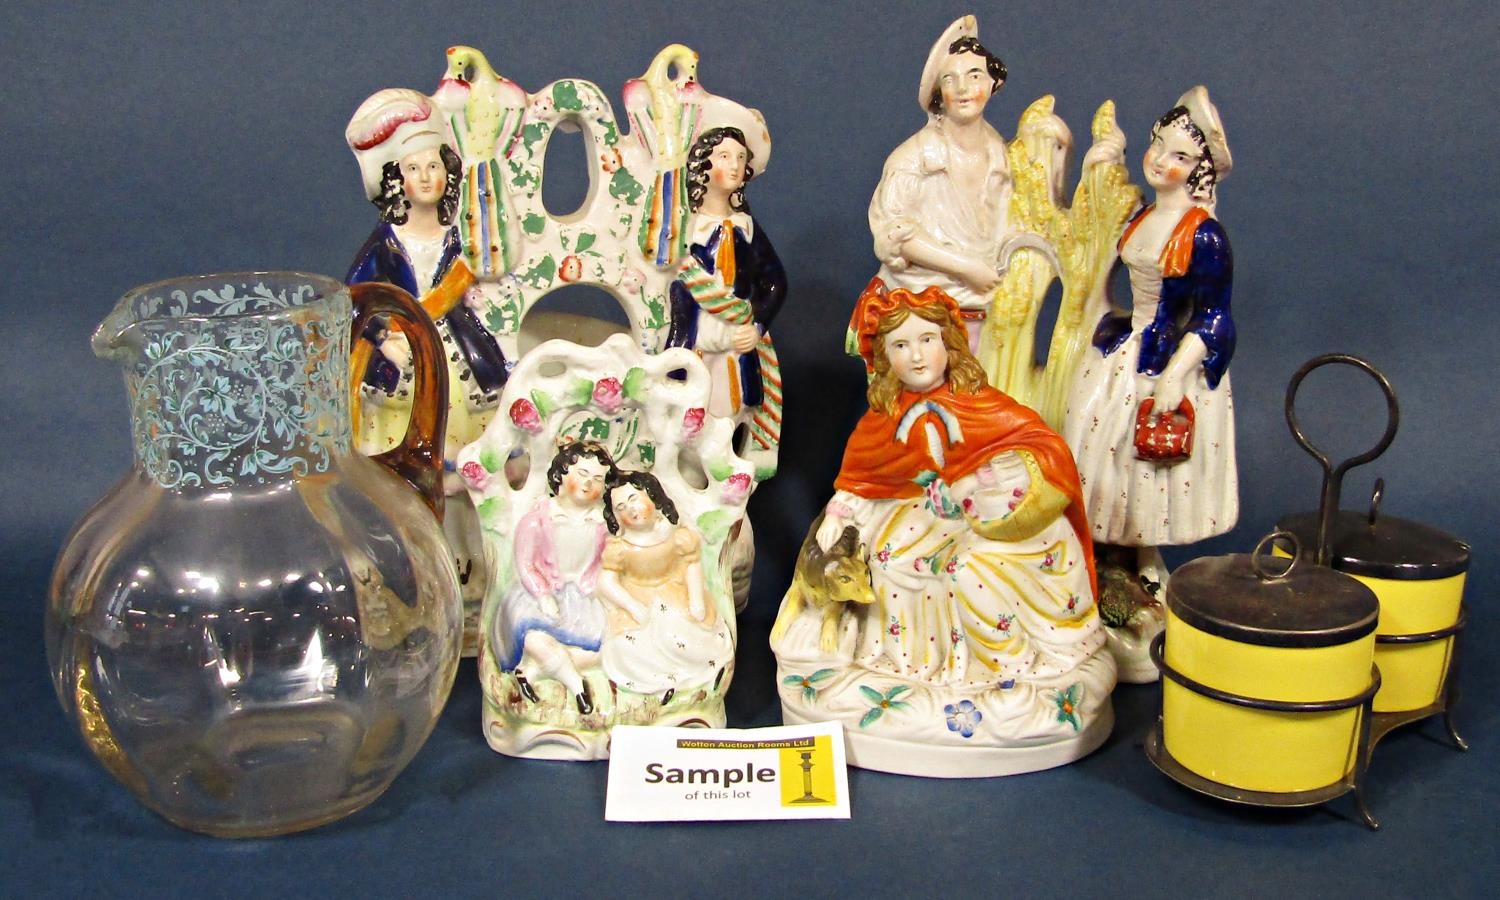 A quantity of 19th century Staffordshire figure groups including equestrian subjects The Duke of